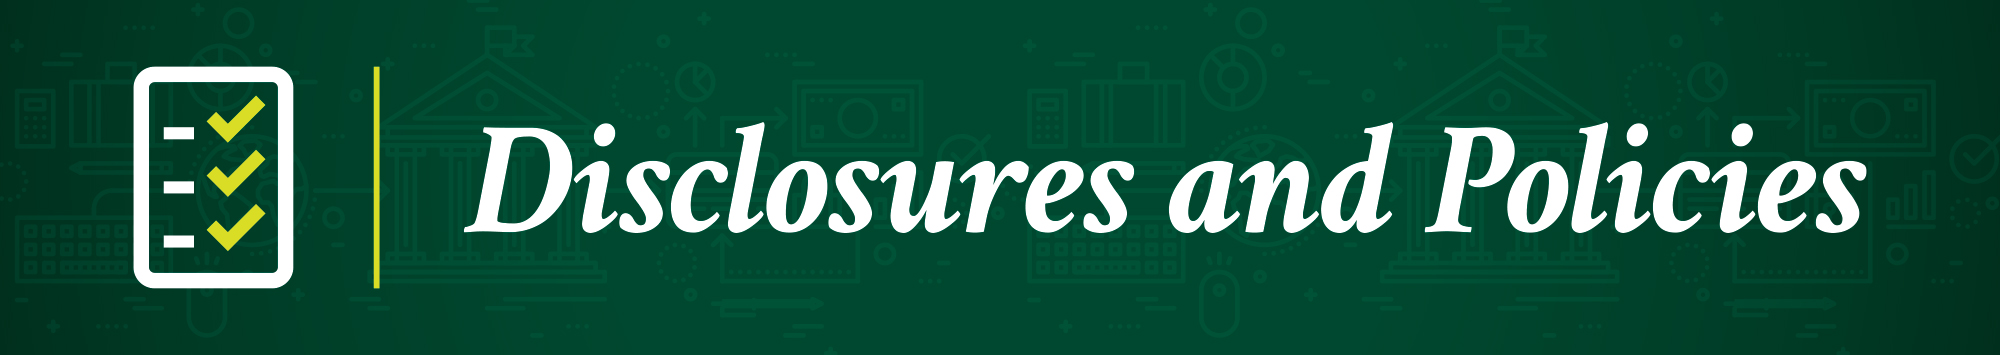 Disclosures and Policies Banner